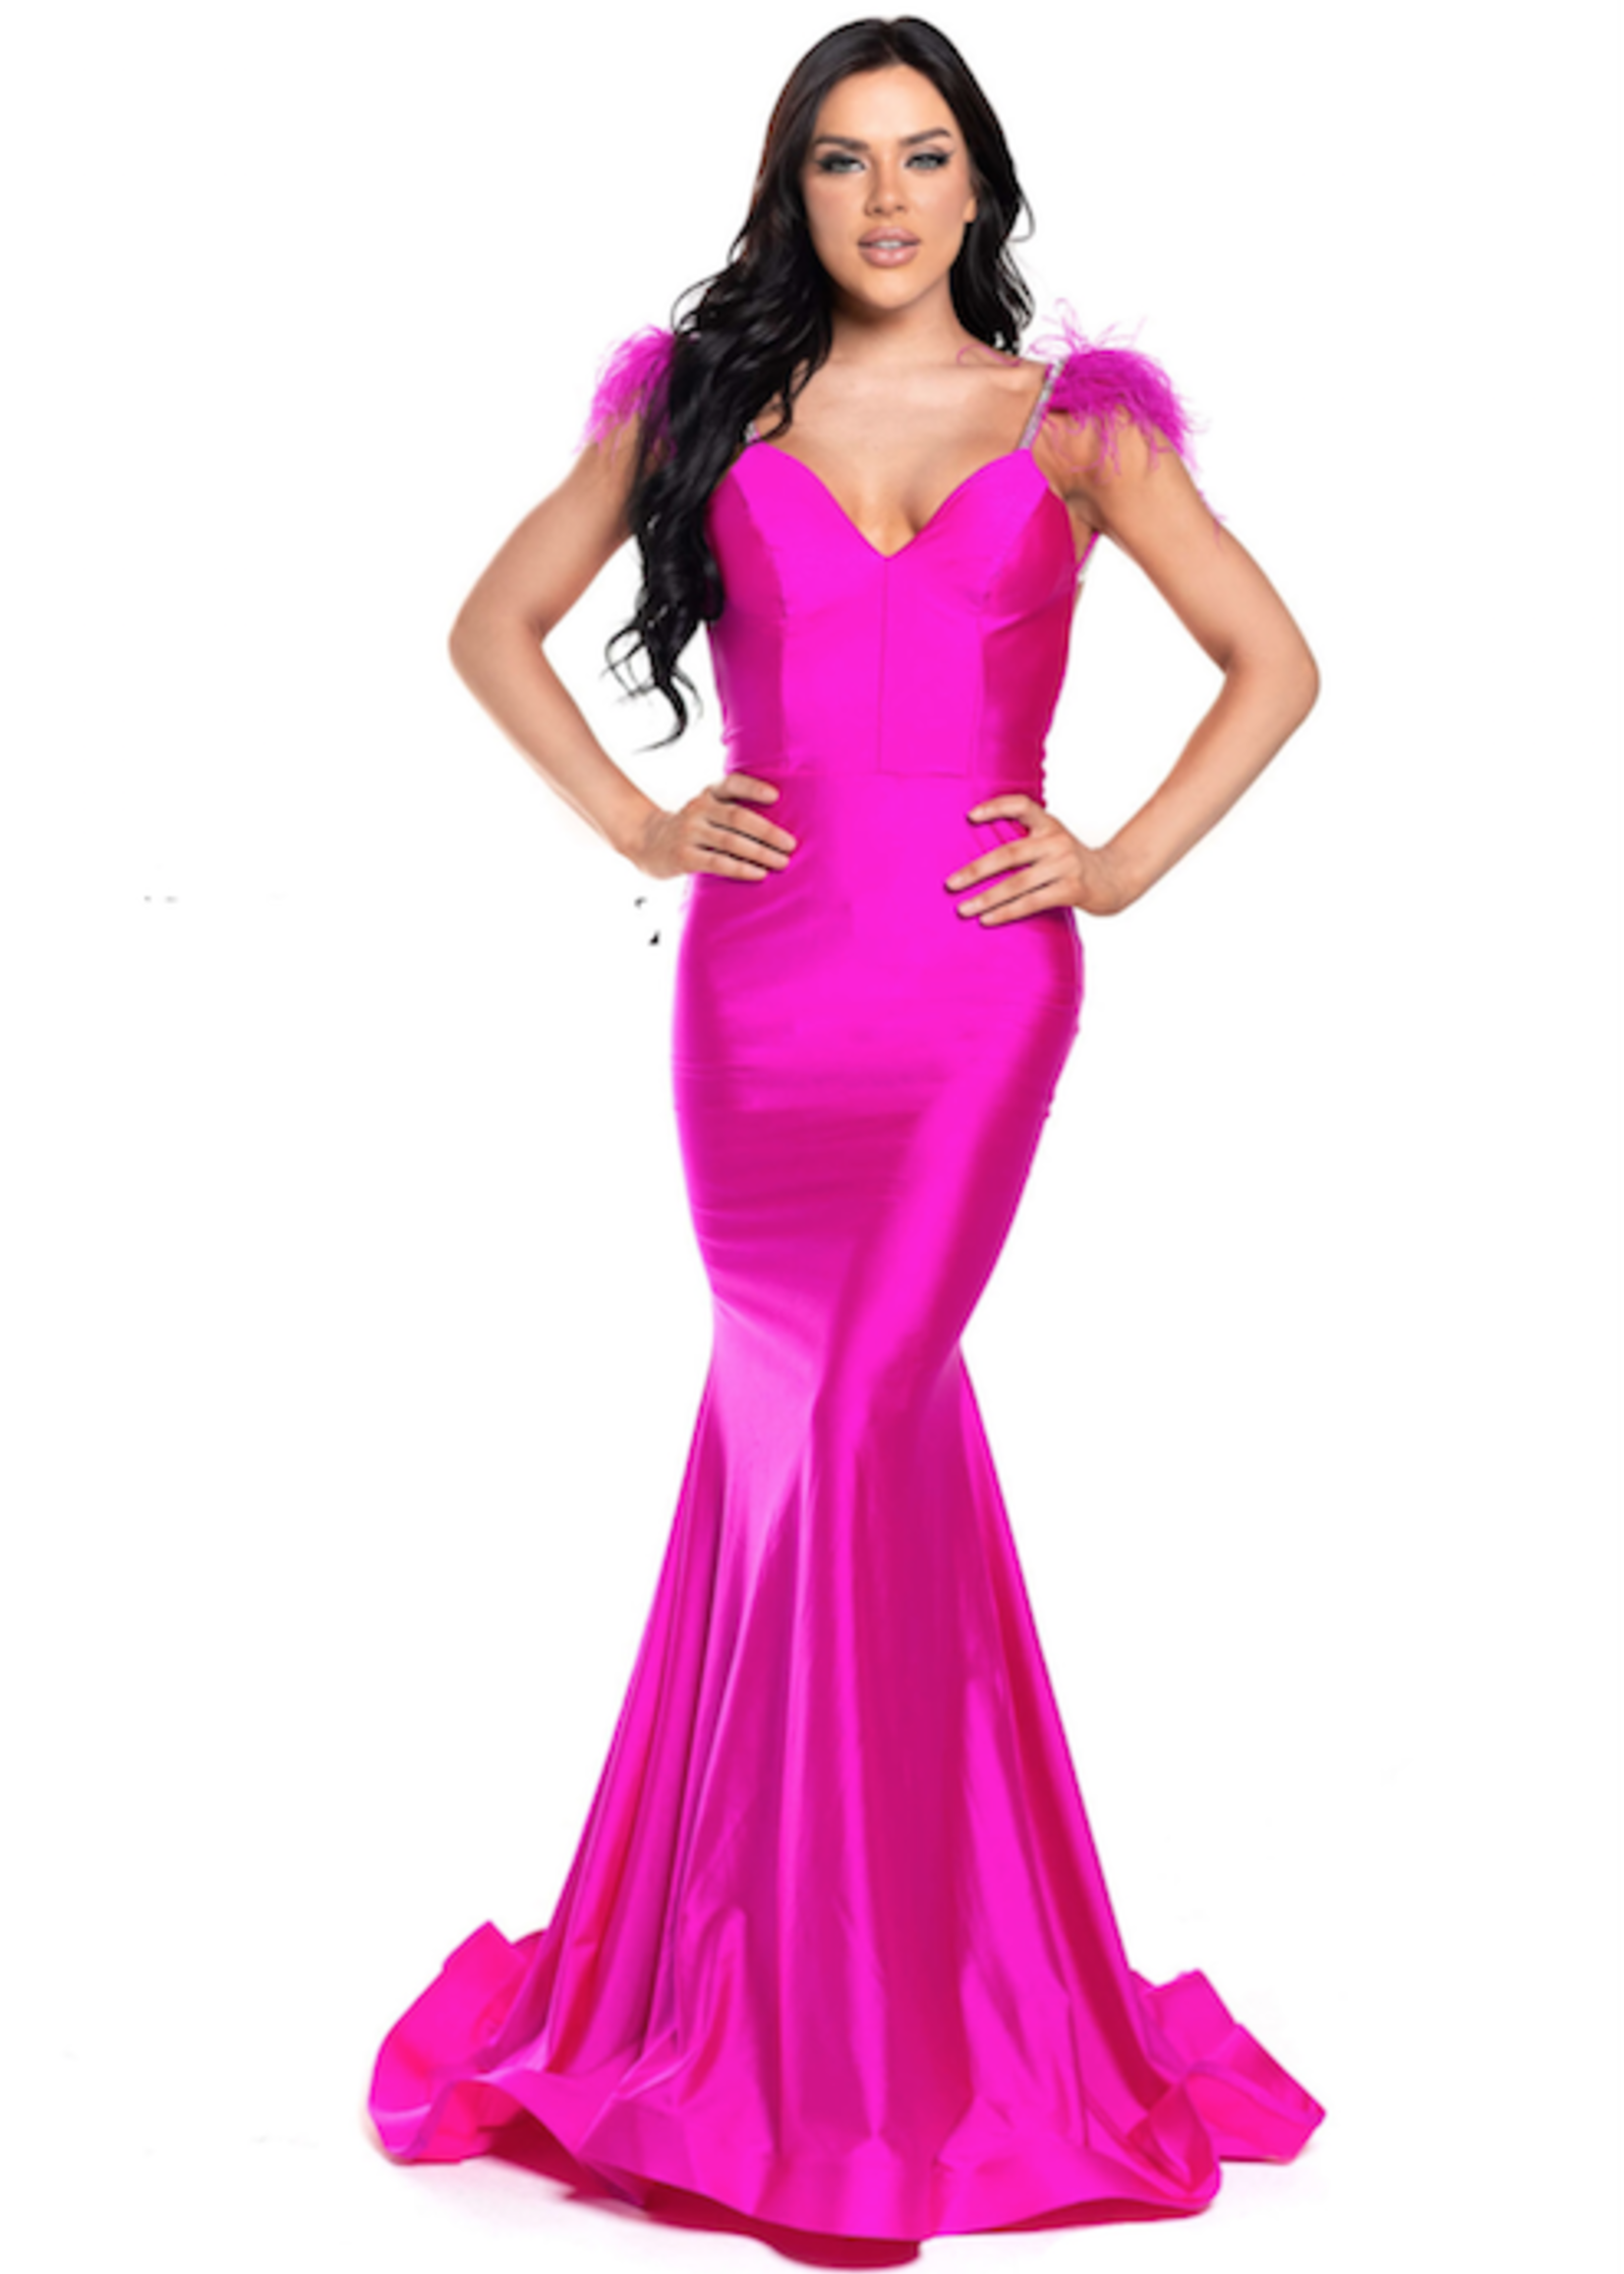 Fabulous Feather Formal Dress (110 Colors)